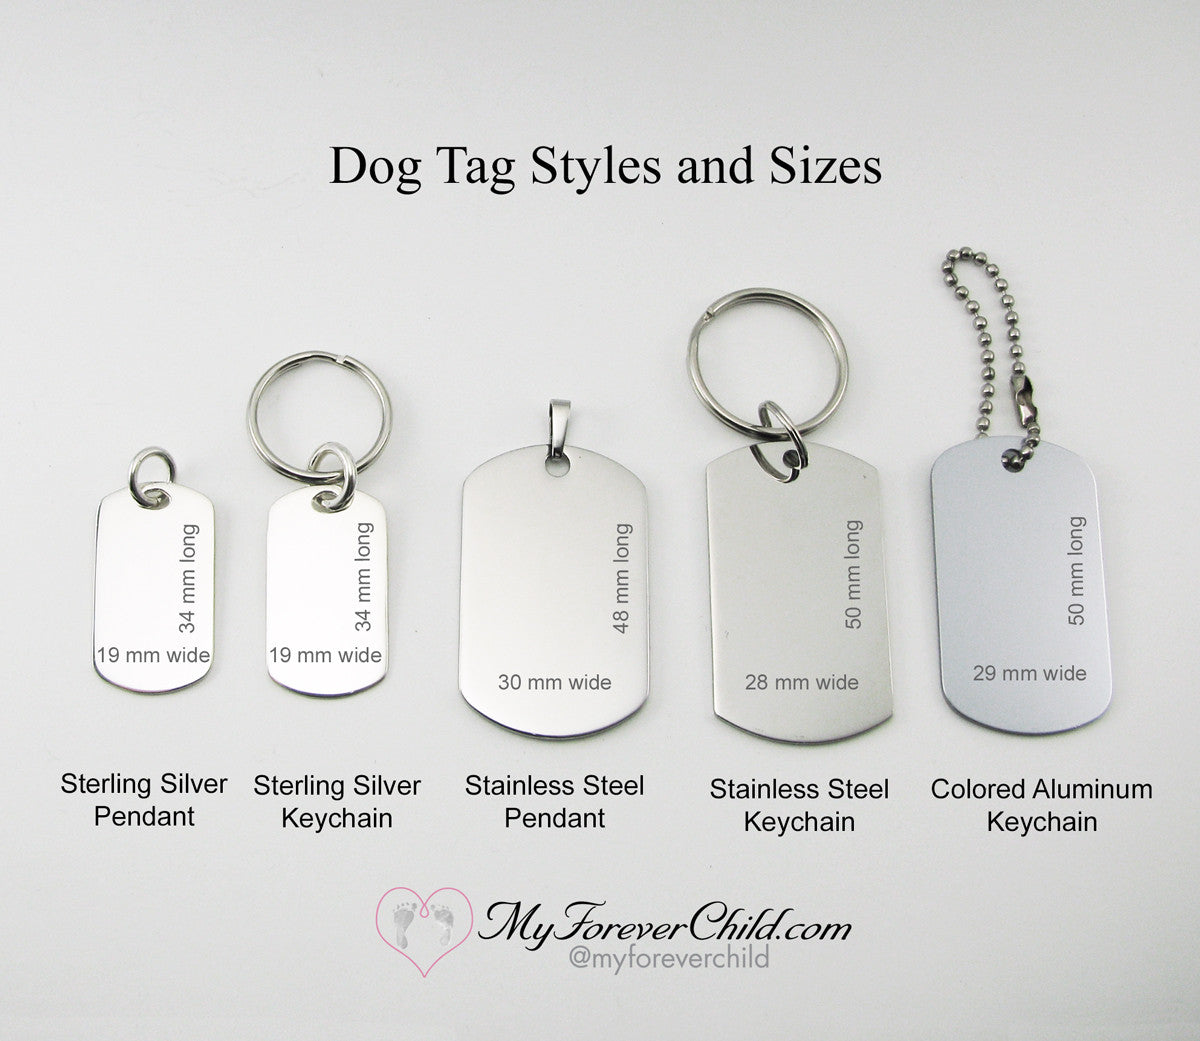 Our 2 Precious Babies- Two Butterflies stainless steel dog tag pendant memorial keychain